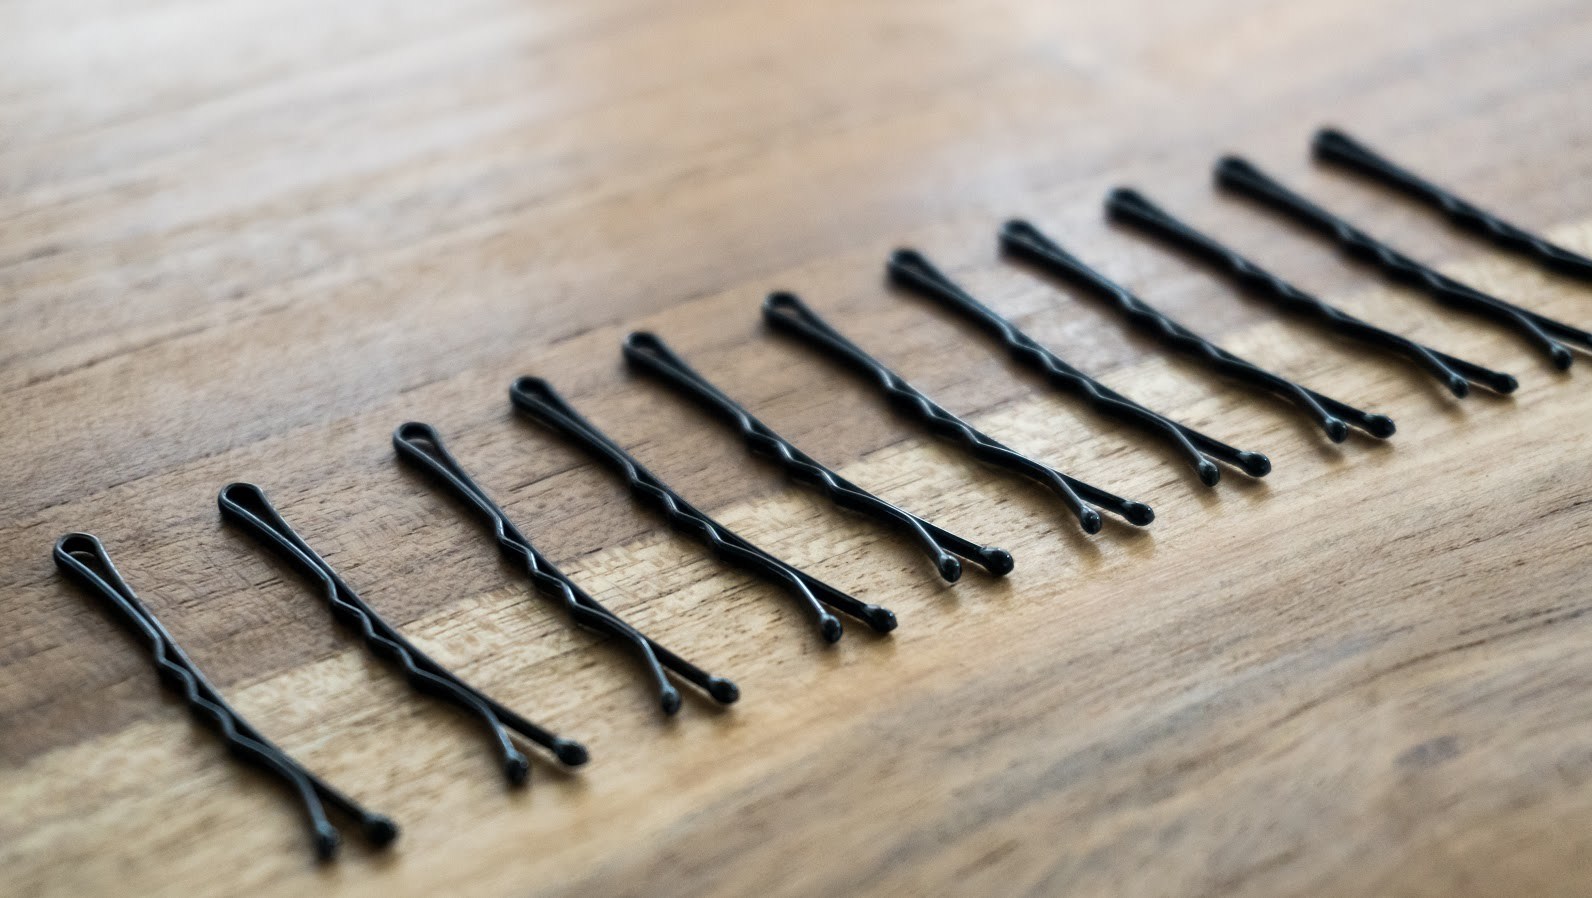 12 Unexpected Household Uses for Bobby Pins